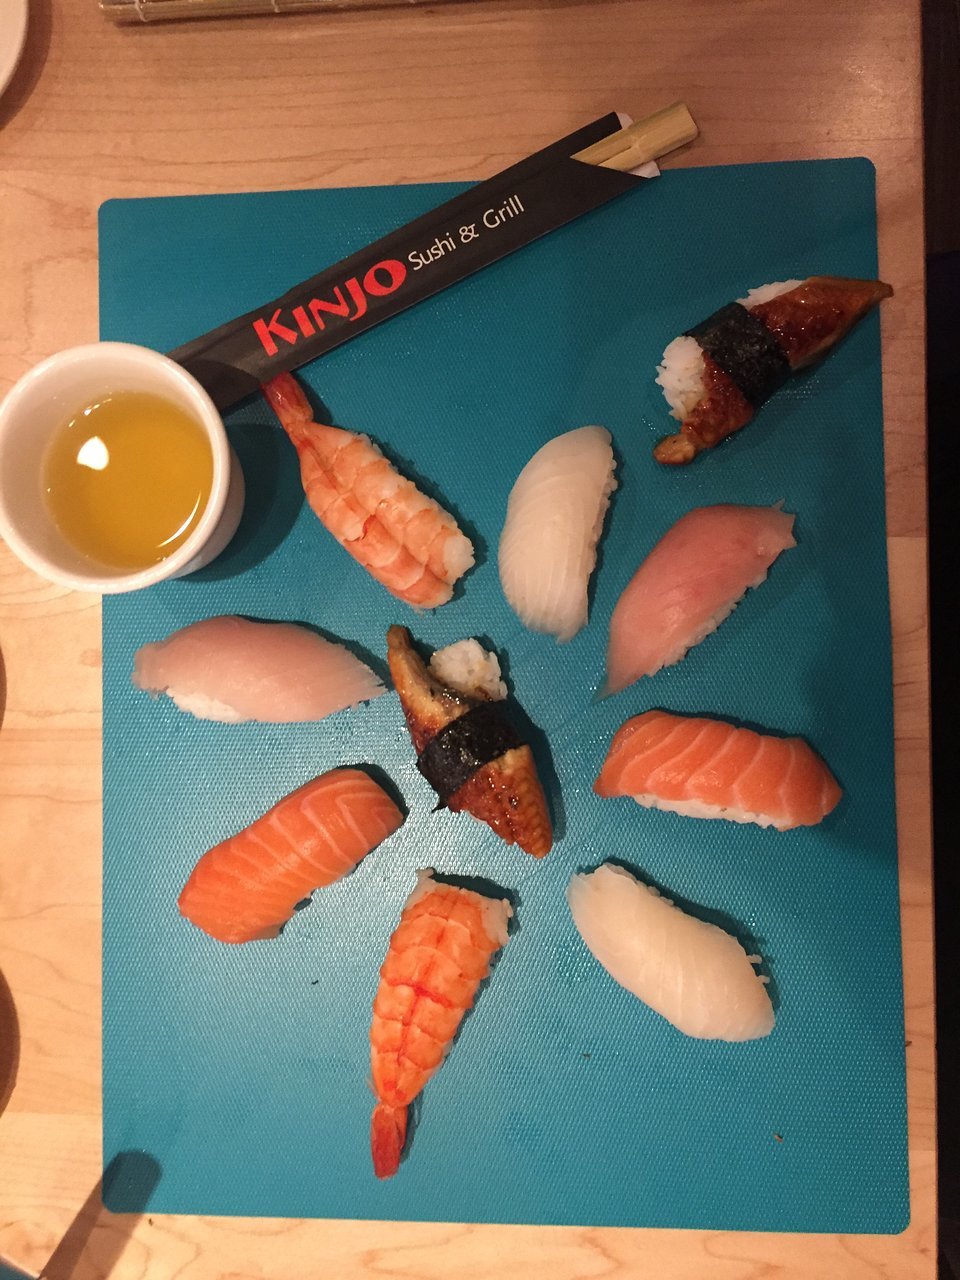 Kinjo Sushi and Grill